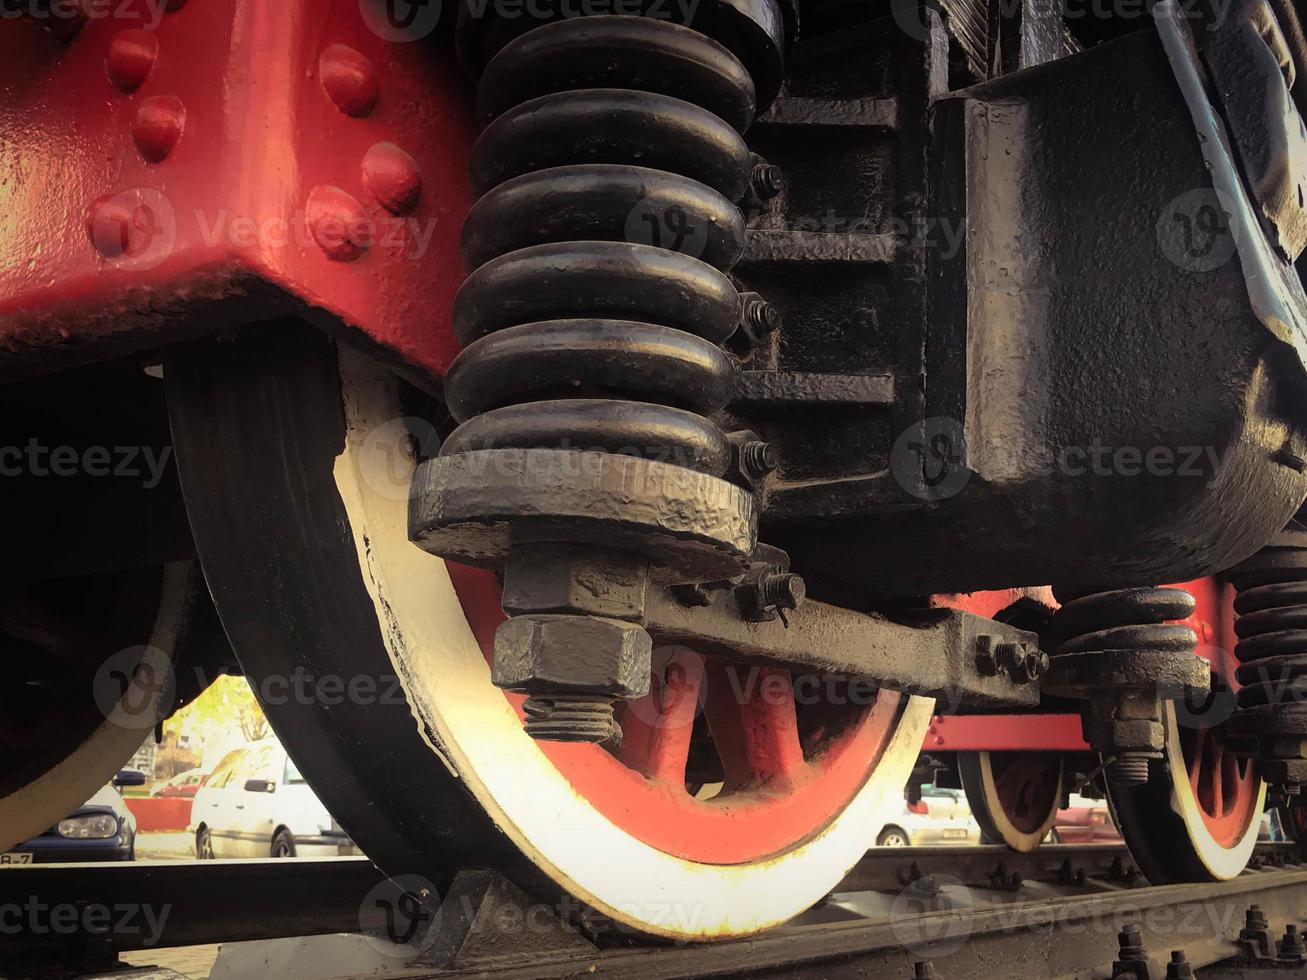 Large iron wheels of a red and black train standing on rails and suspension elements with springs of an old industrial steam locomotive photo